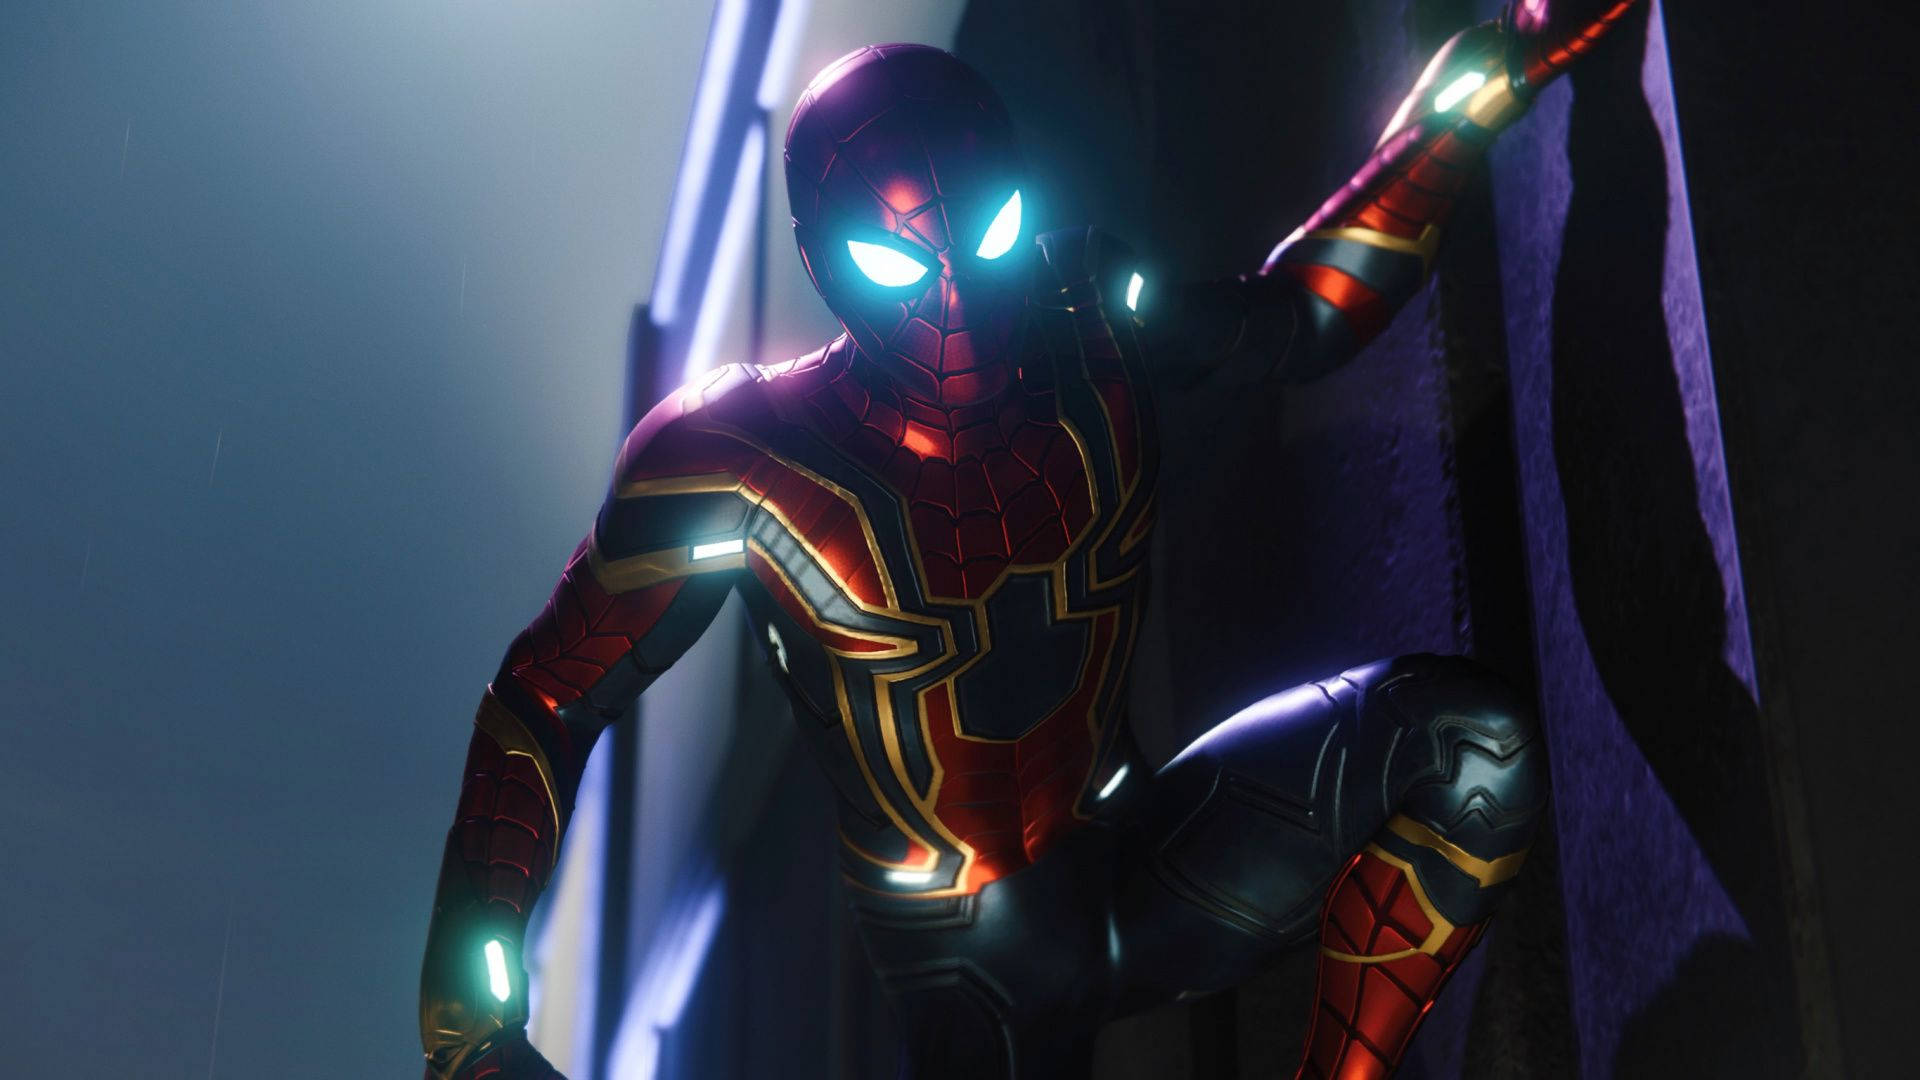 Iron Spider Armor With Gleaming Eyes